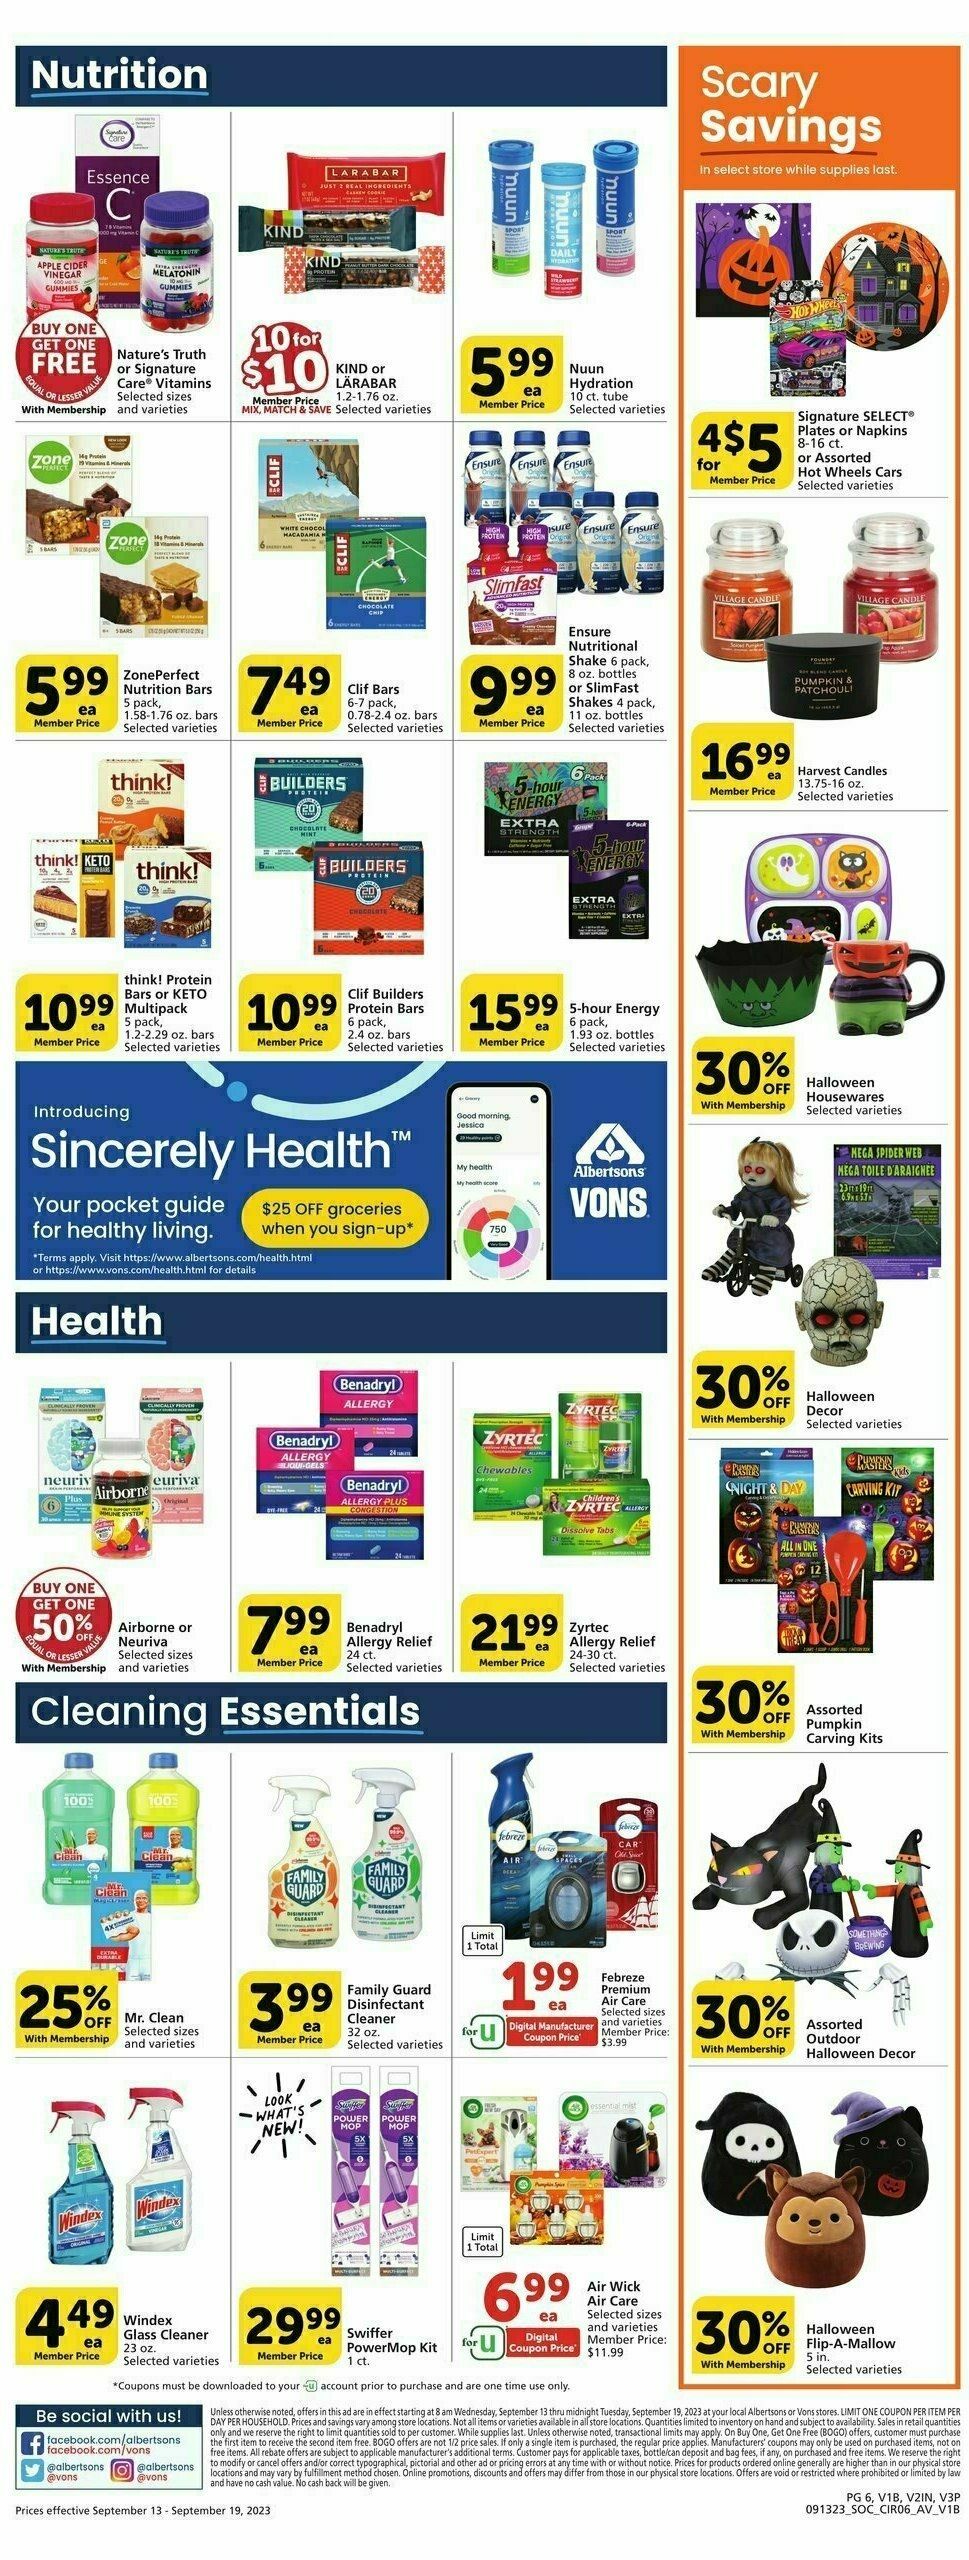 Vons Weekly Ad from September 13